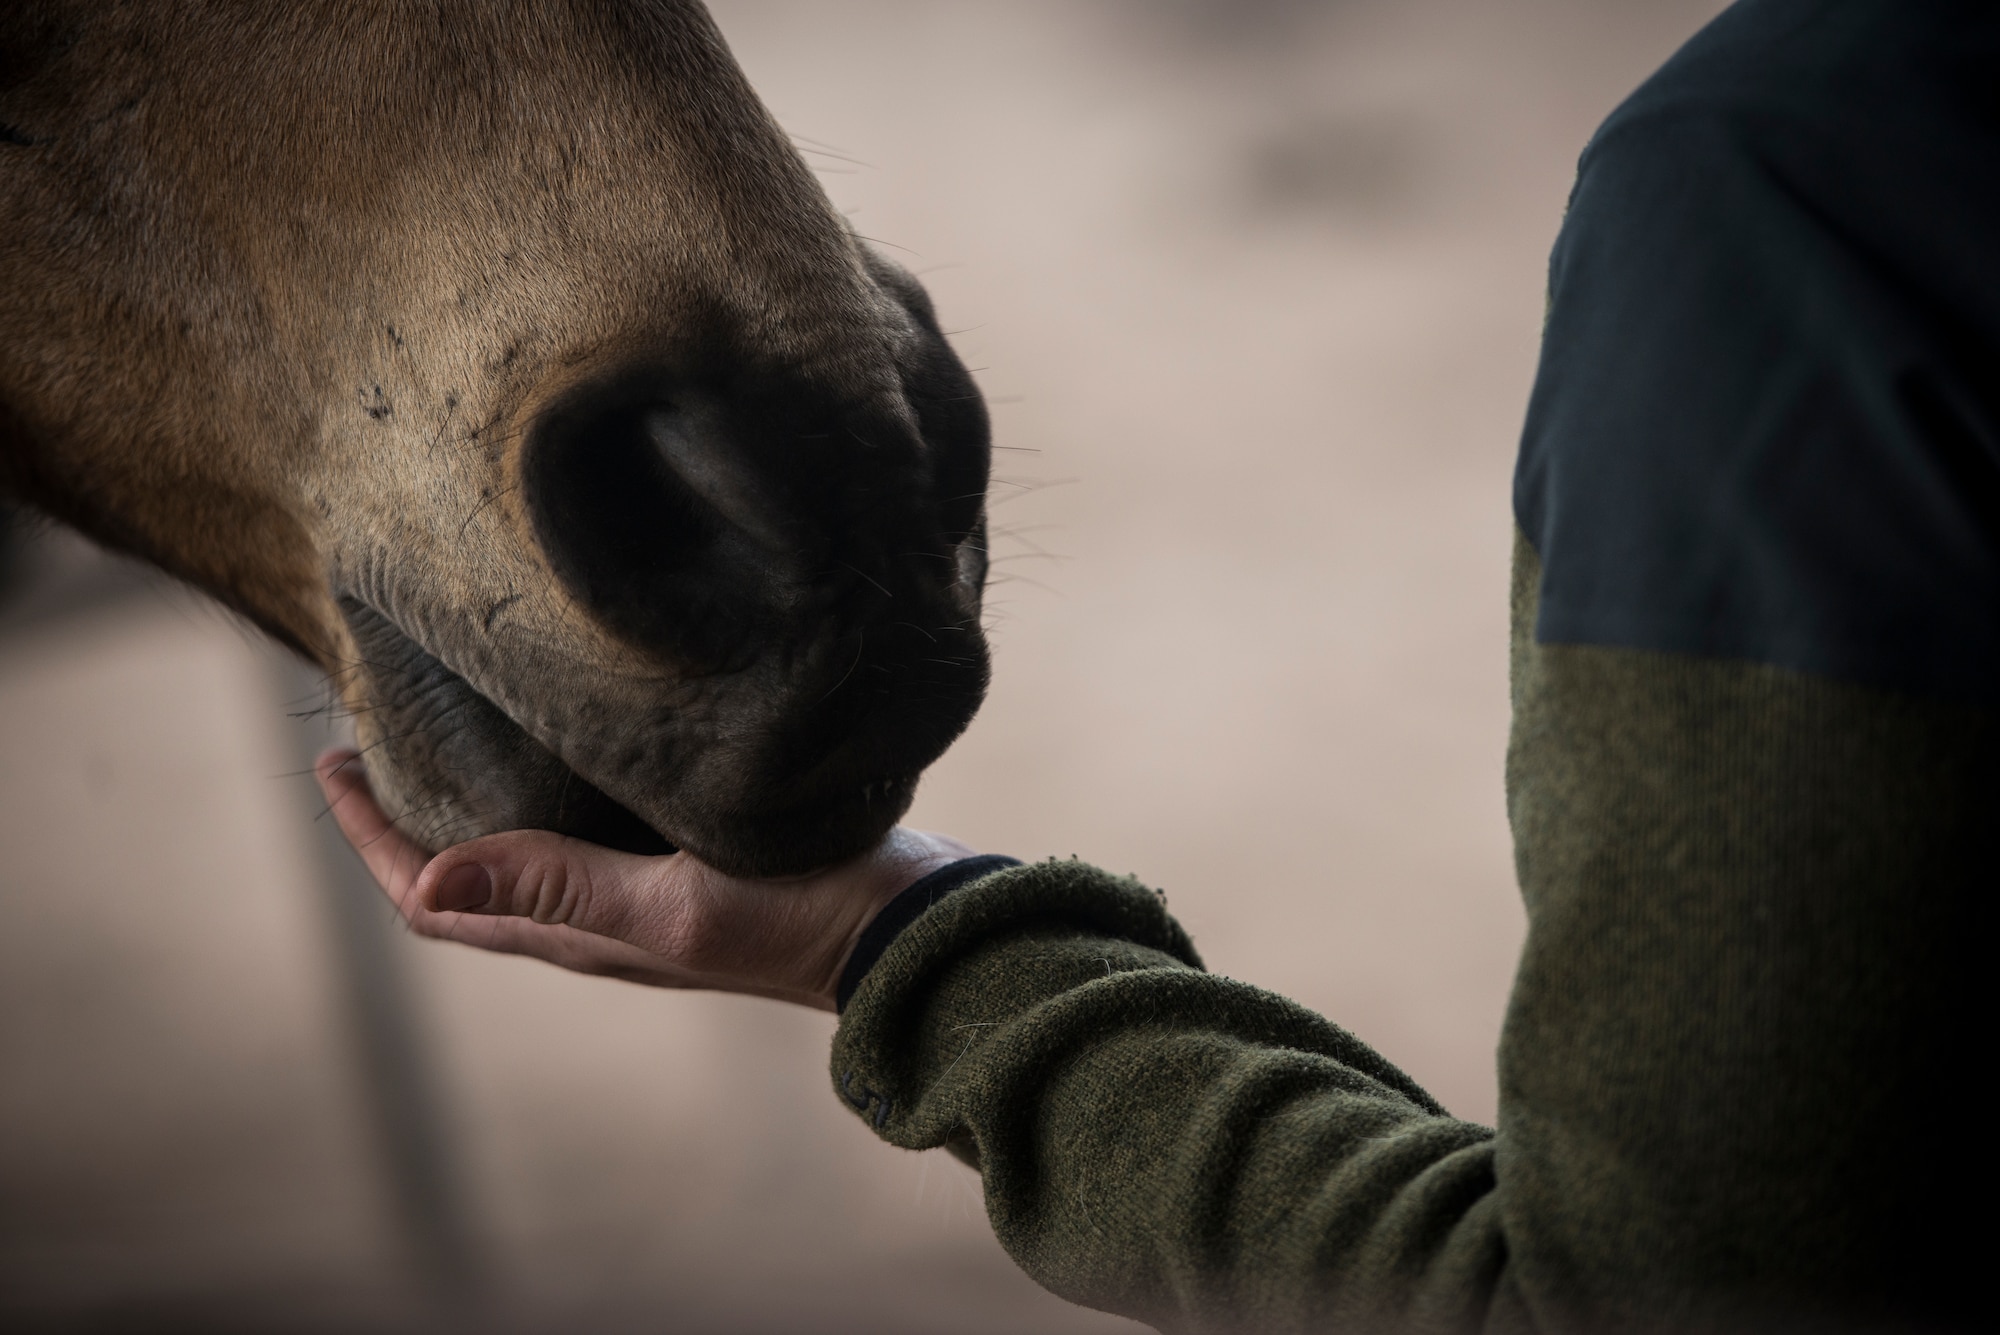 The members of the Vandenberg Air Force Base's conservation law enforcement patrolmen team often show signs of affection toward the military horse to help create a relationship and comfort level among them. The team is made up of seven patrolmen and four horses. (U.S. Air Force photo/Staff Sgt. Andrew Lee)